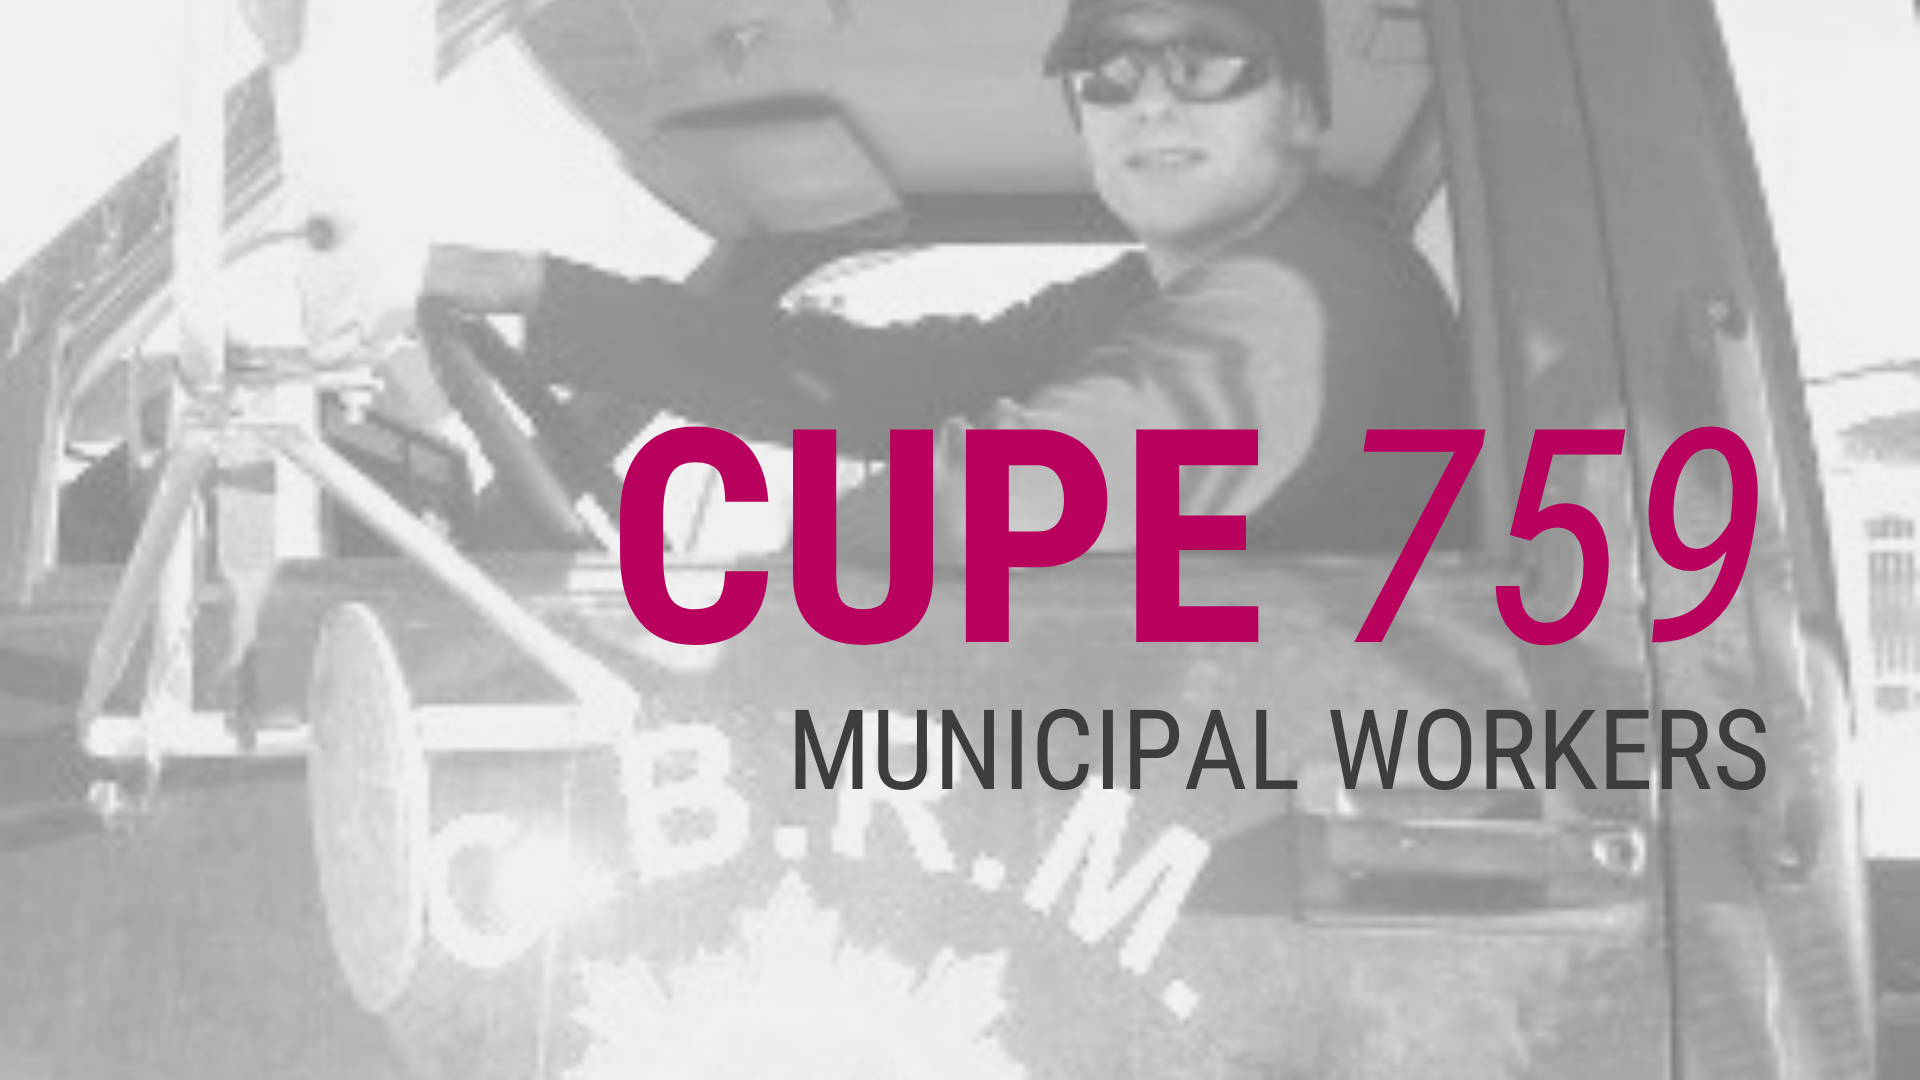 Black and white image of a man in the driver's seat of a dump truck with CBRM written on the side. Text overlay: CUPE 759 municipal workers.